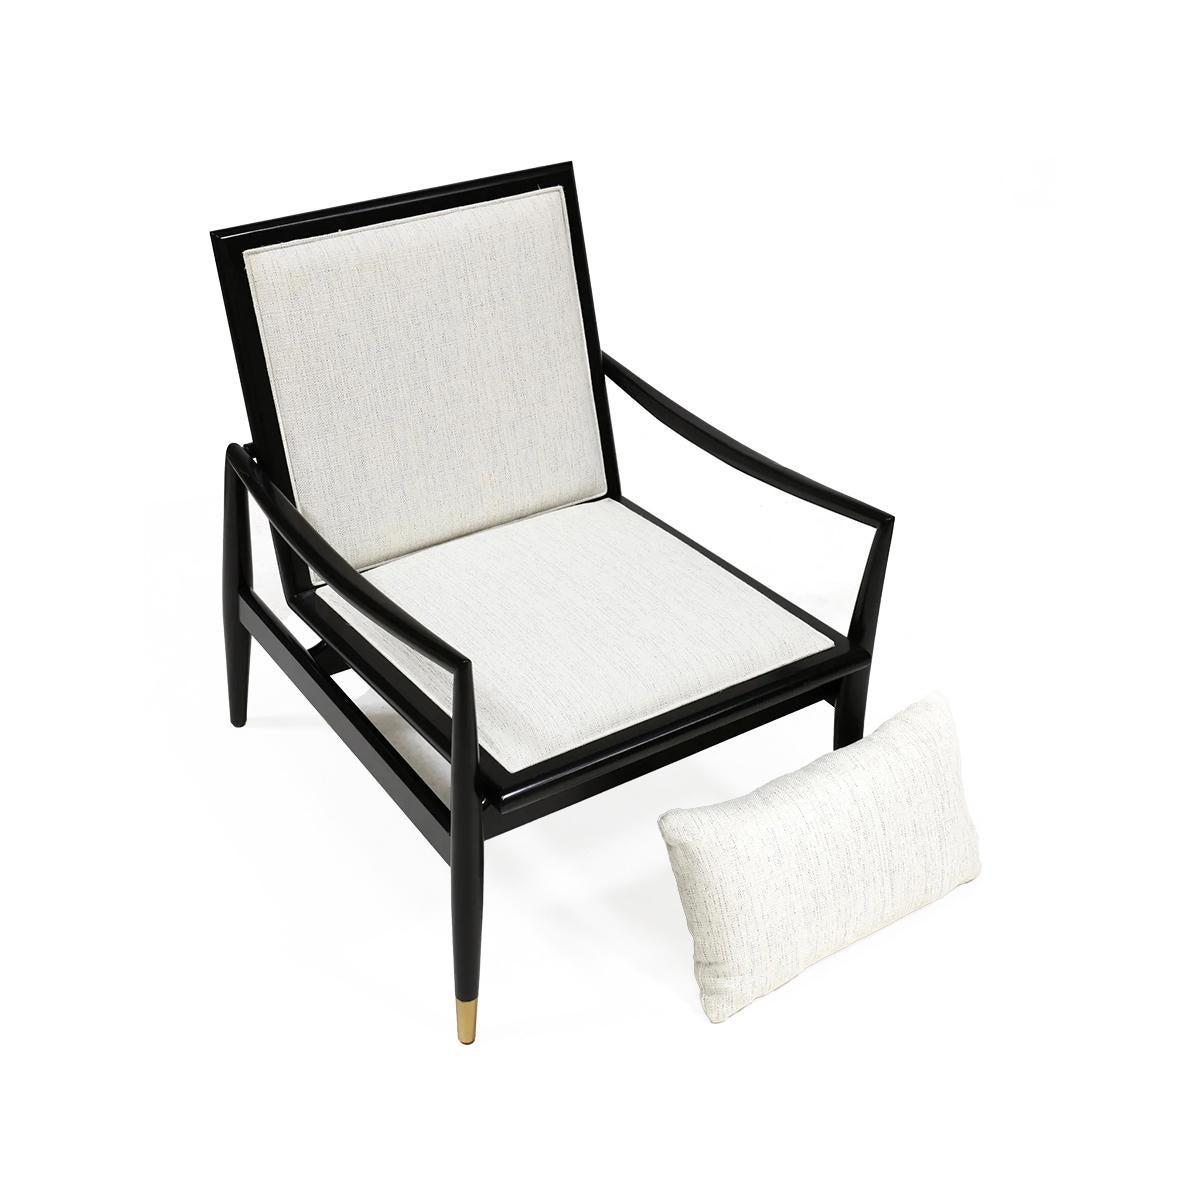 In an ebonized black lacquered finish. With an upholstered cushion backrest and seat in a Linen performance fabric. 

The classic modern and graceful frame with an angled back and swooping arms, with brass caps to the legs.

Dimensions: 26